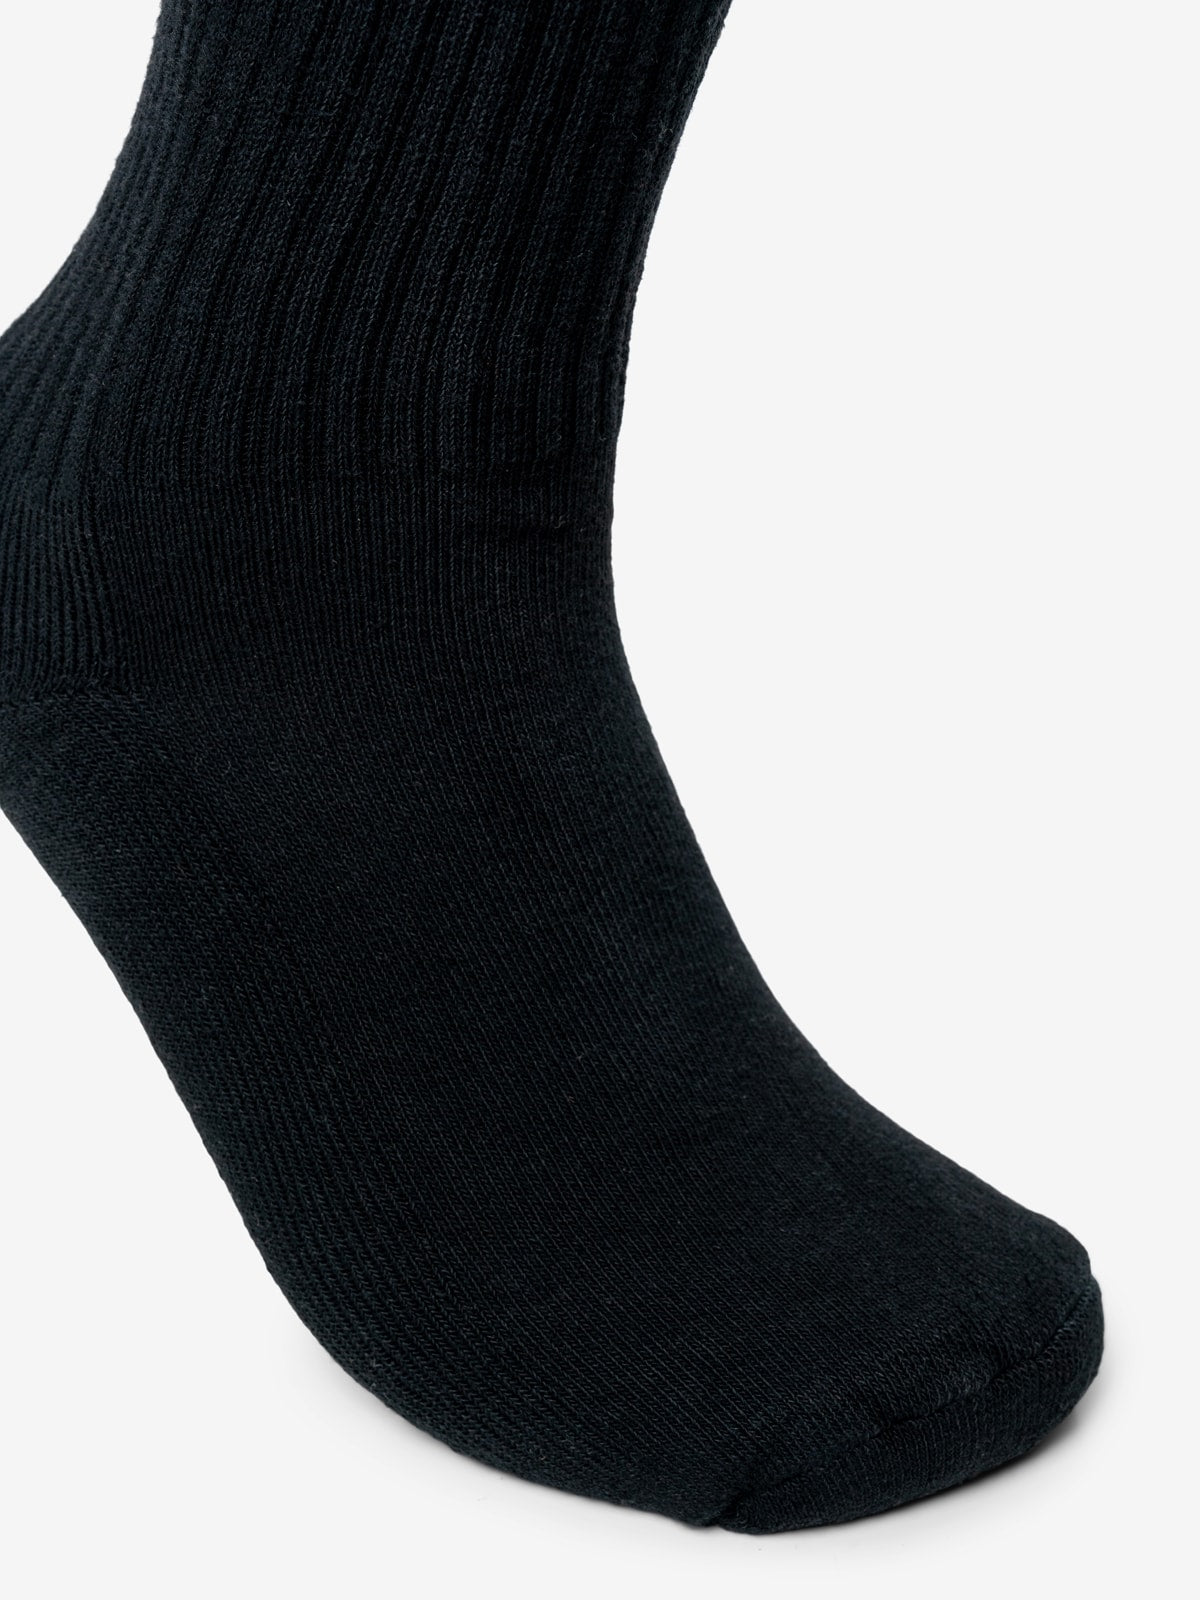 Insect Shield Adult Crew Socks (Two-Pair Pack)